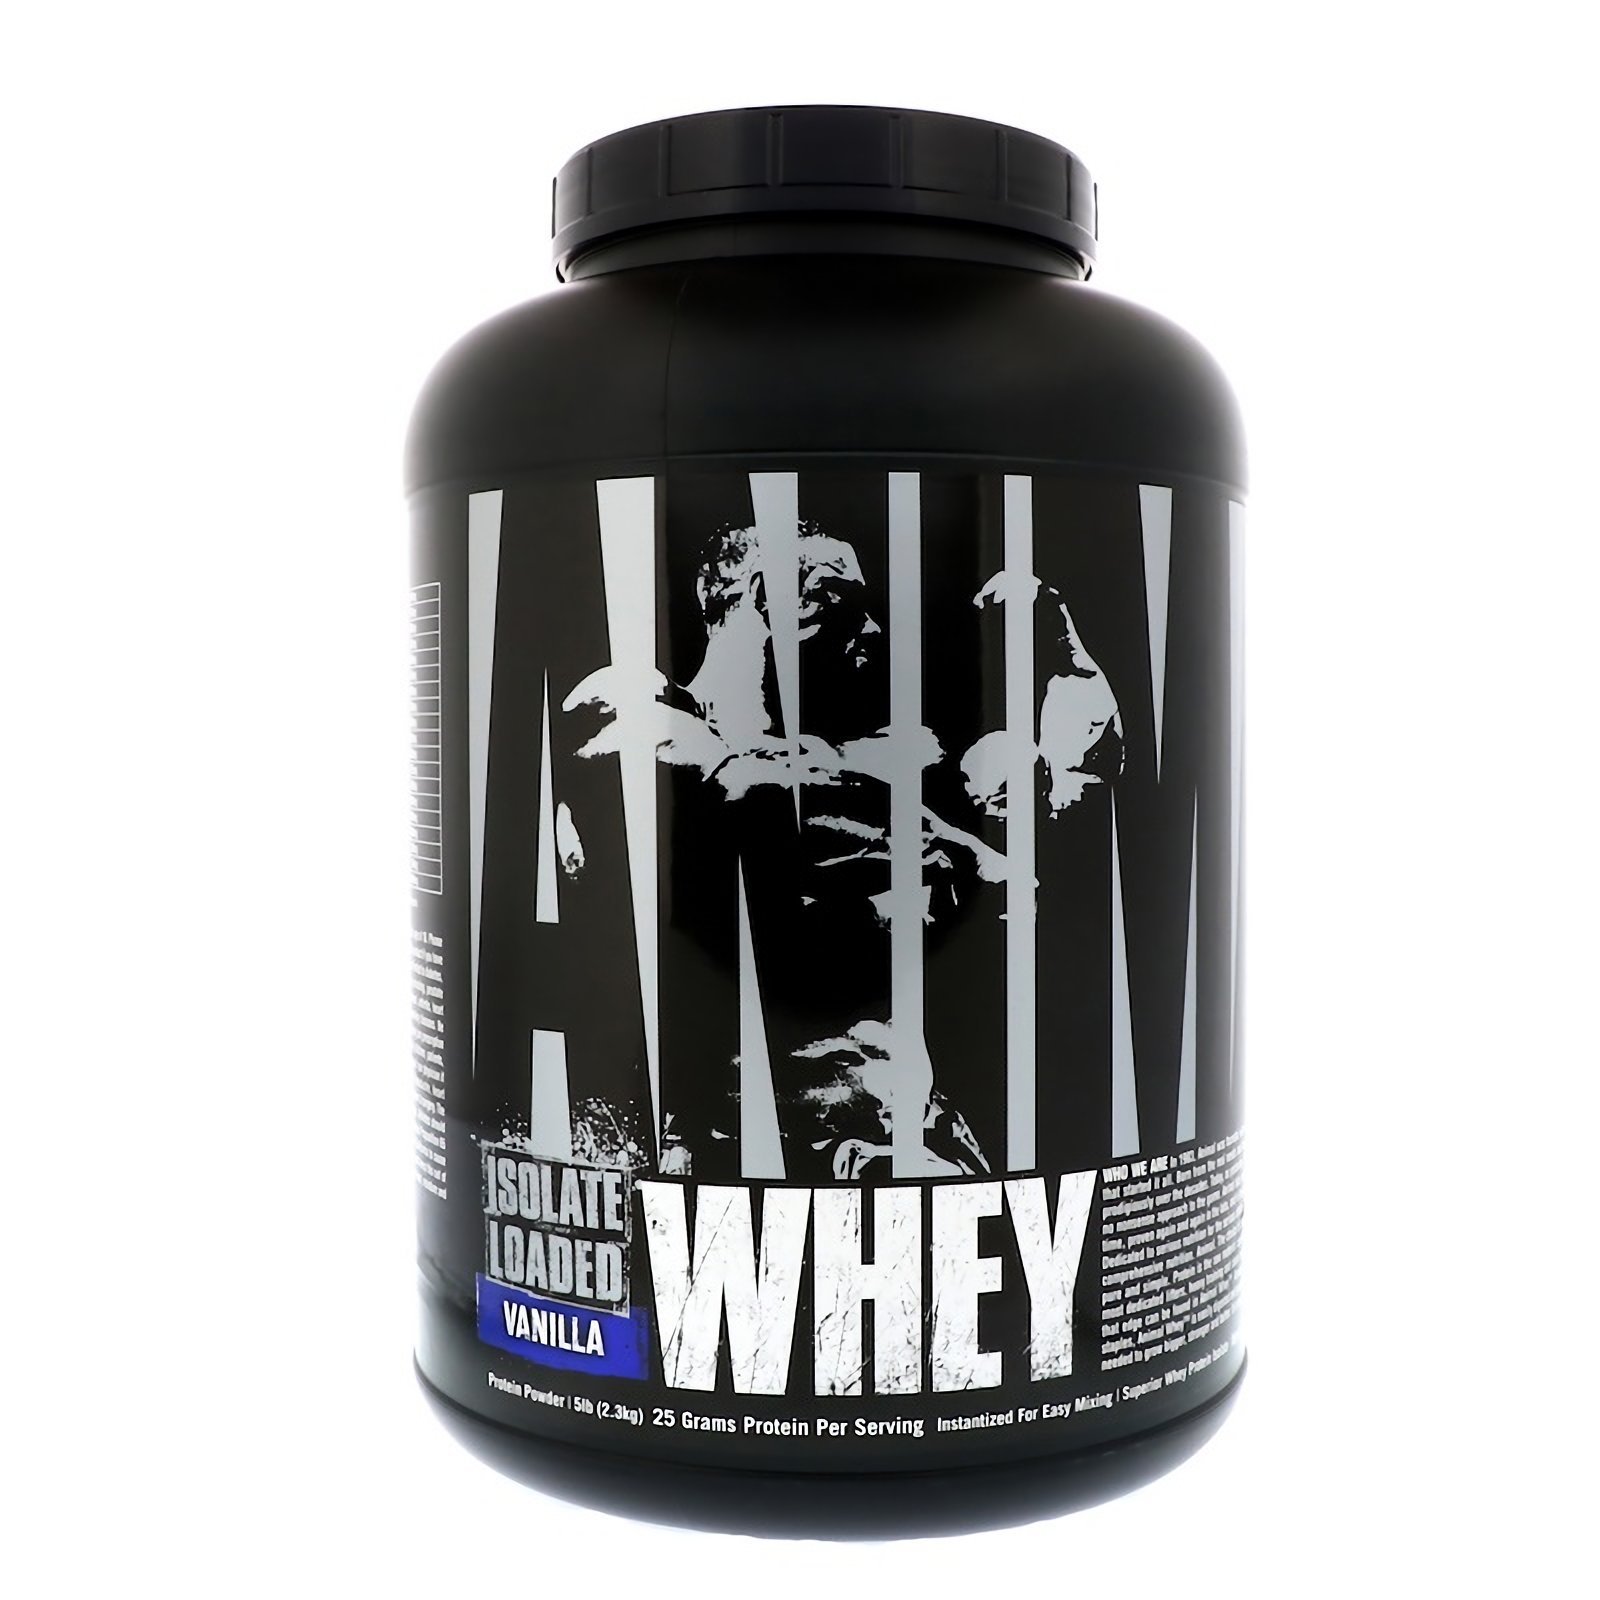 Mua Animal Whey Isolate Whey Protein Powder – Isolate Loaded for Post  Workout and Recovery – Low Sugar with Highly Digestible Whey Isolate Protein  - Vanilla - 5 Pounds trên Amazon Mỹ chính hãng 2023 | Giaonhan247